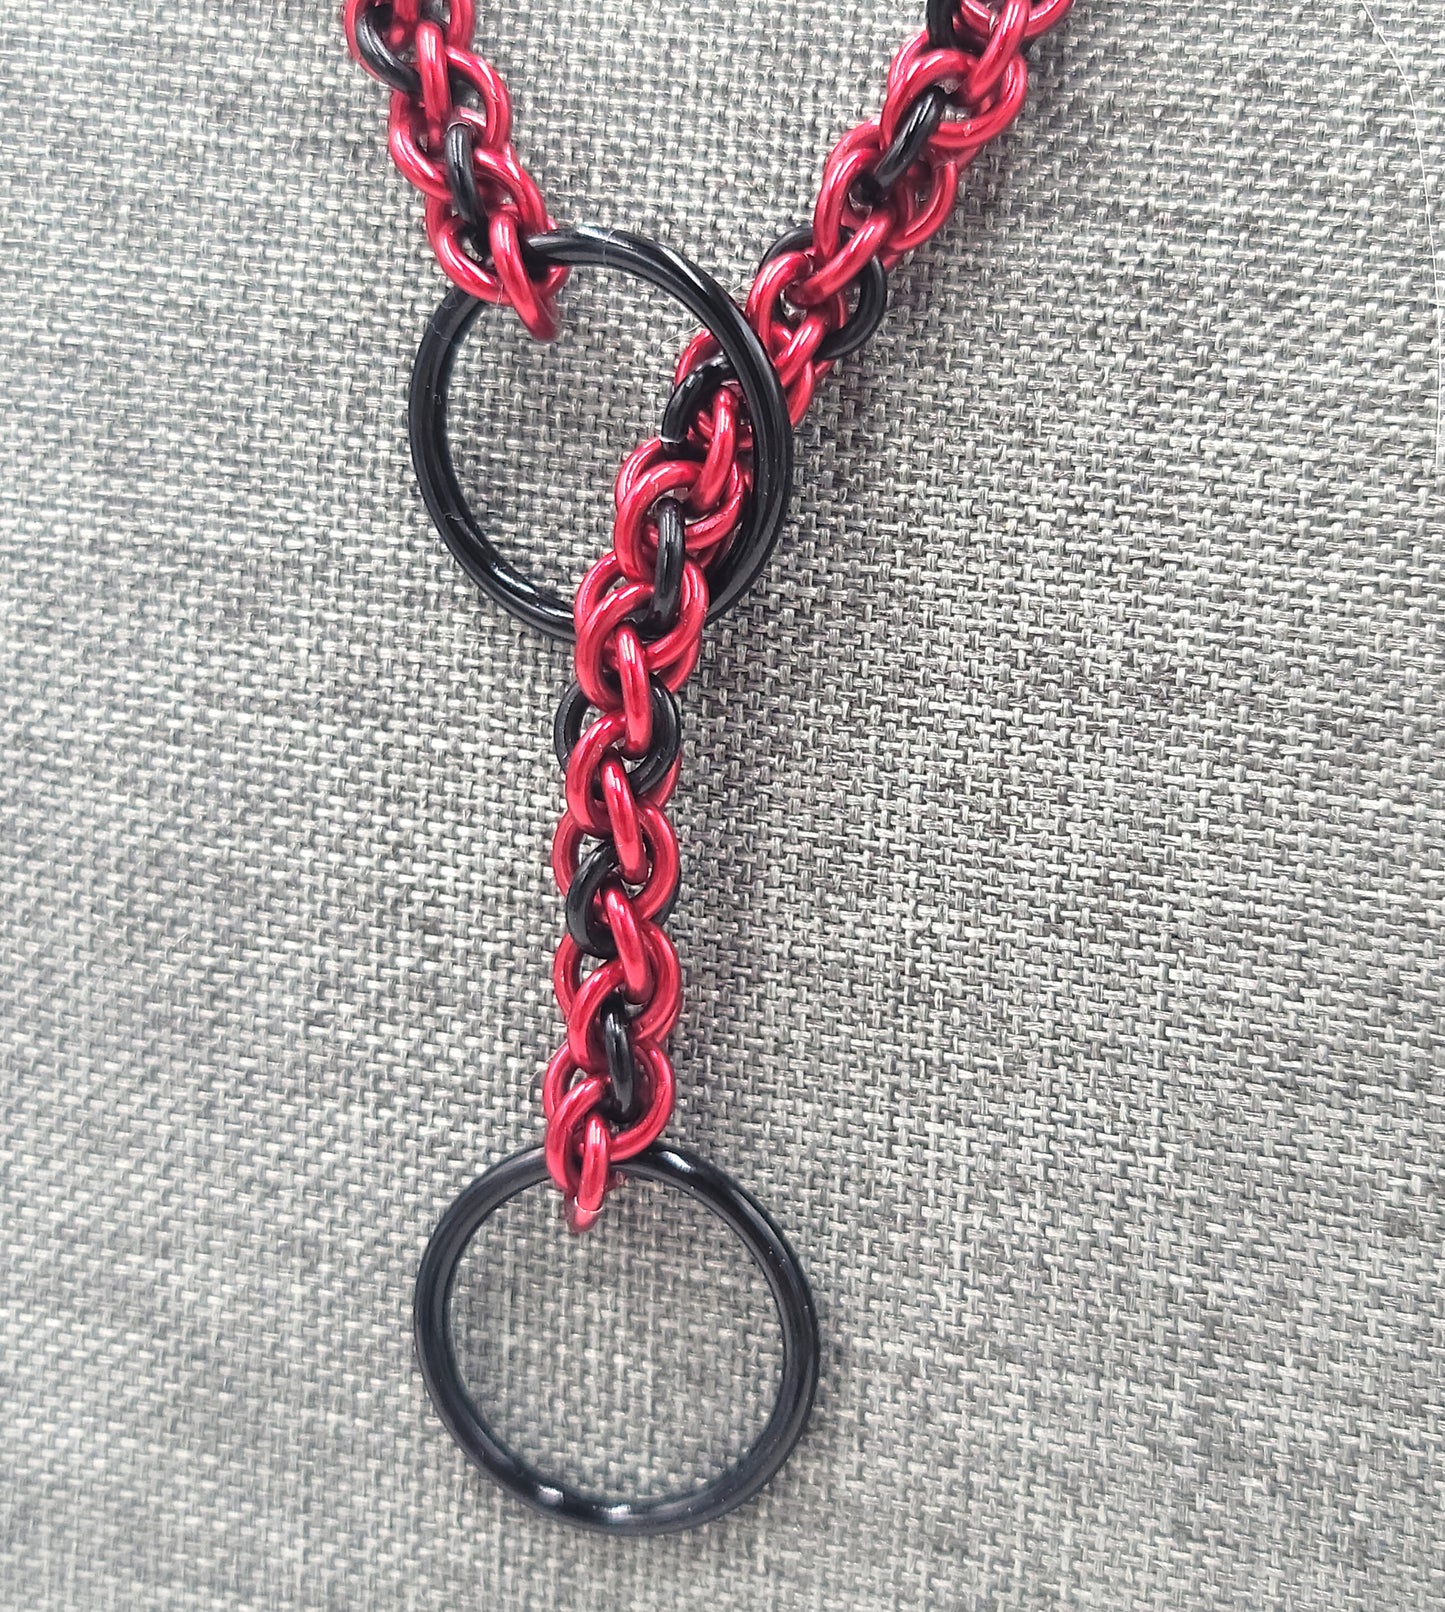 Red and Black Lariat "Choke" Chain